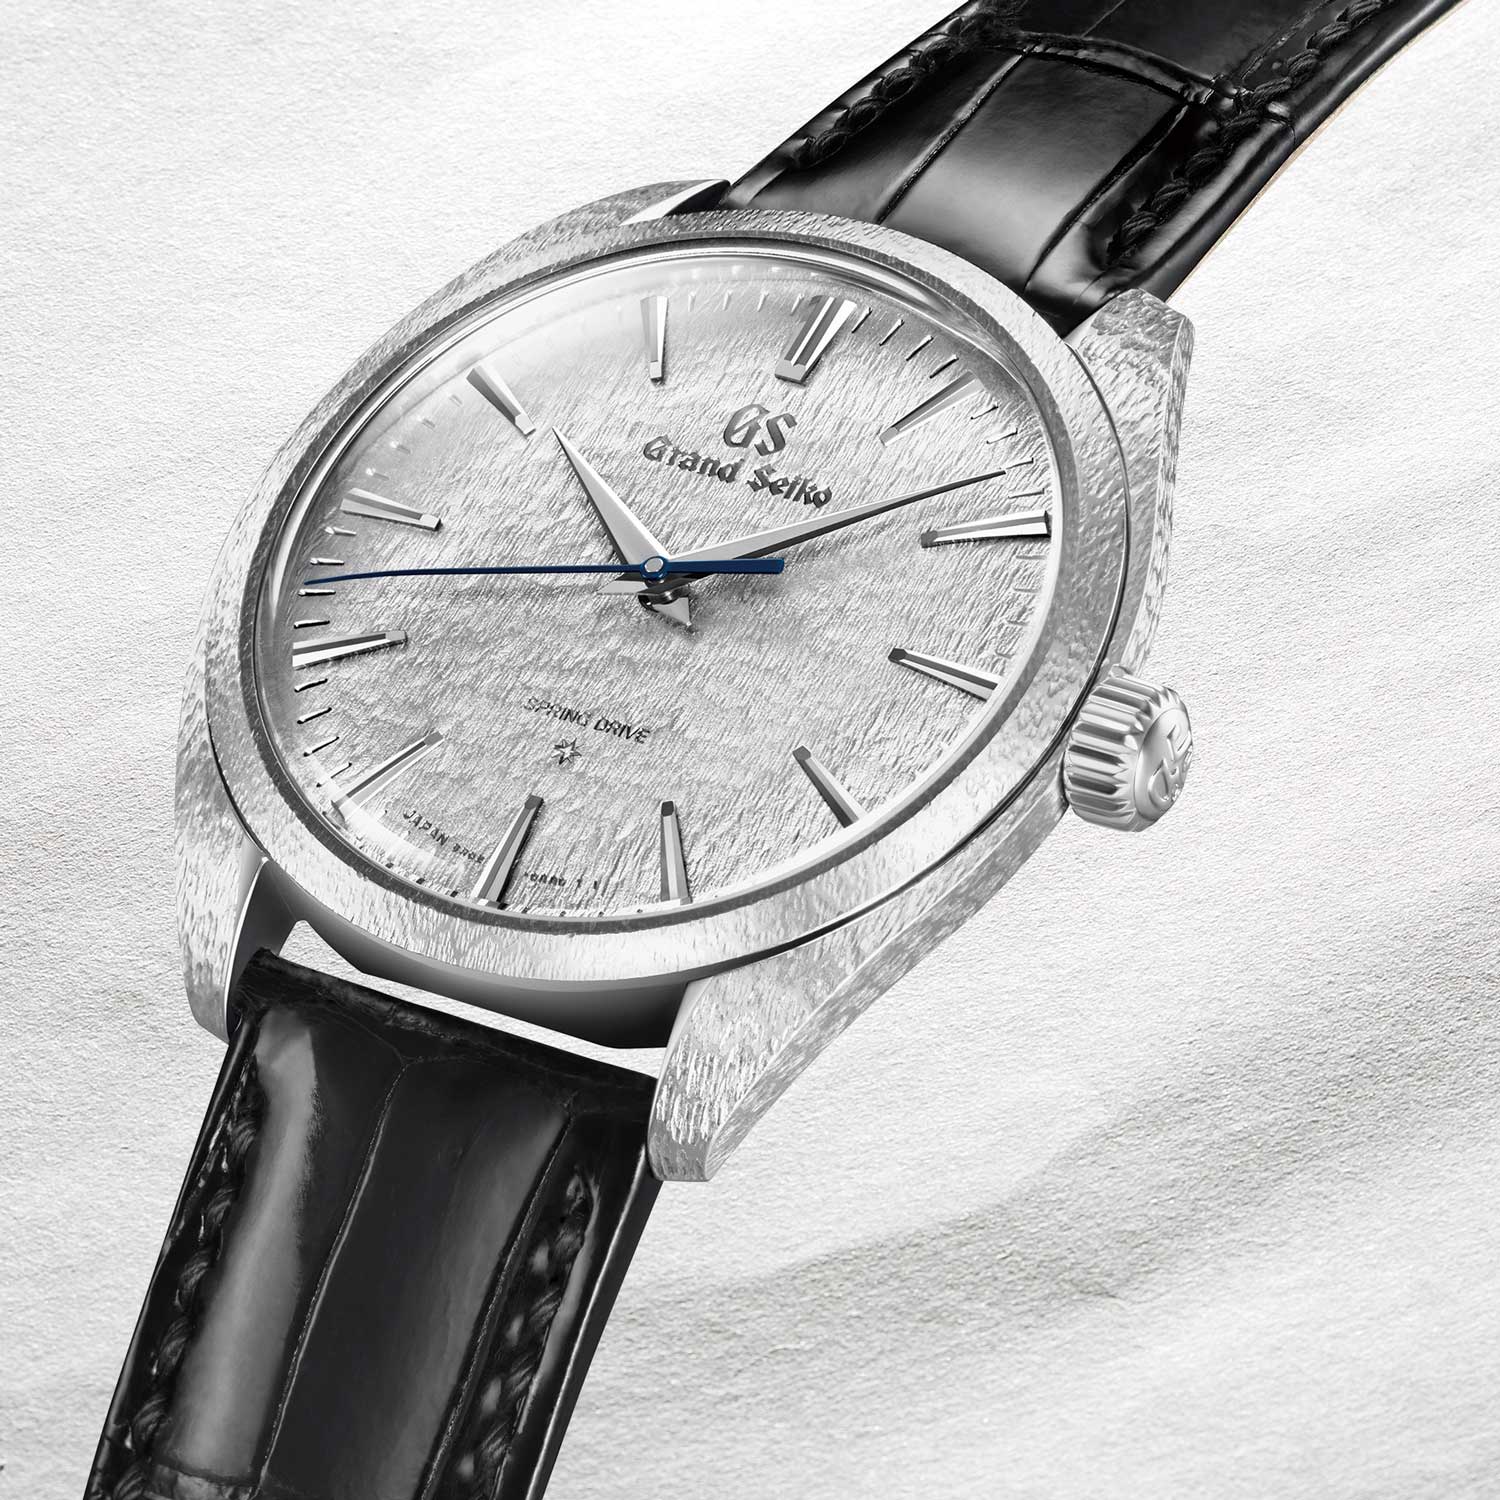 The 2019 Grand Seiko 20th Anniversary Of Spring Drive, in platinum - limited to 30 pieces - ref. SBGZ001 (Image: Grand Seiko)